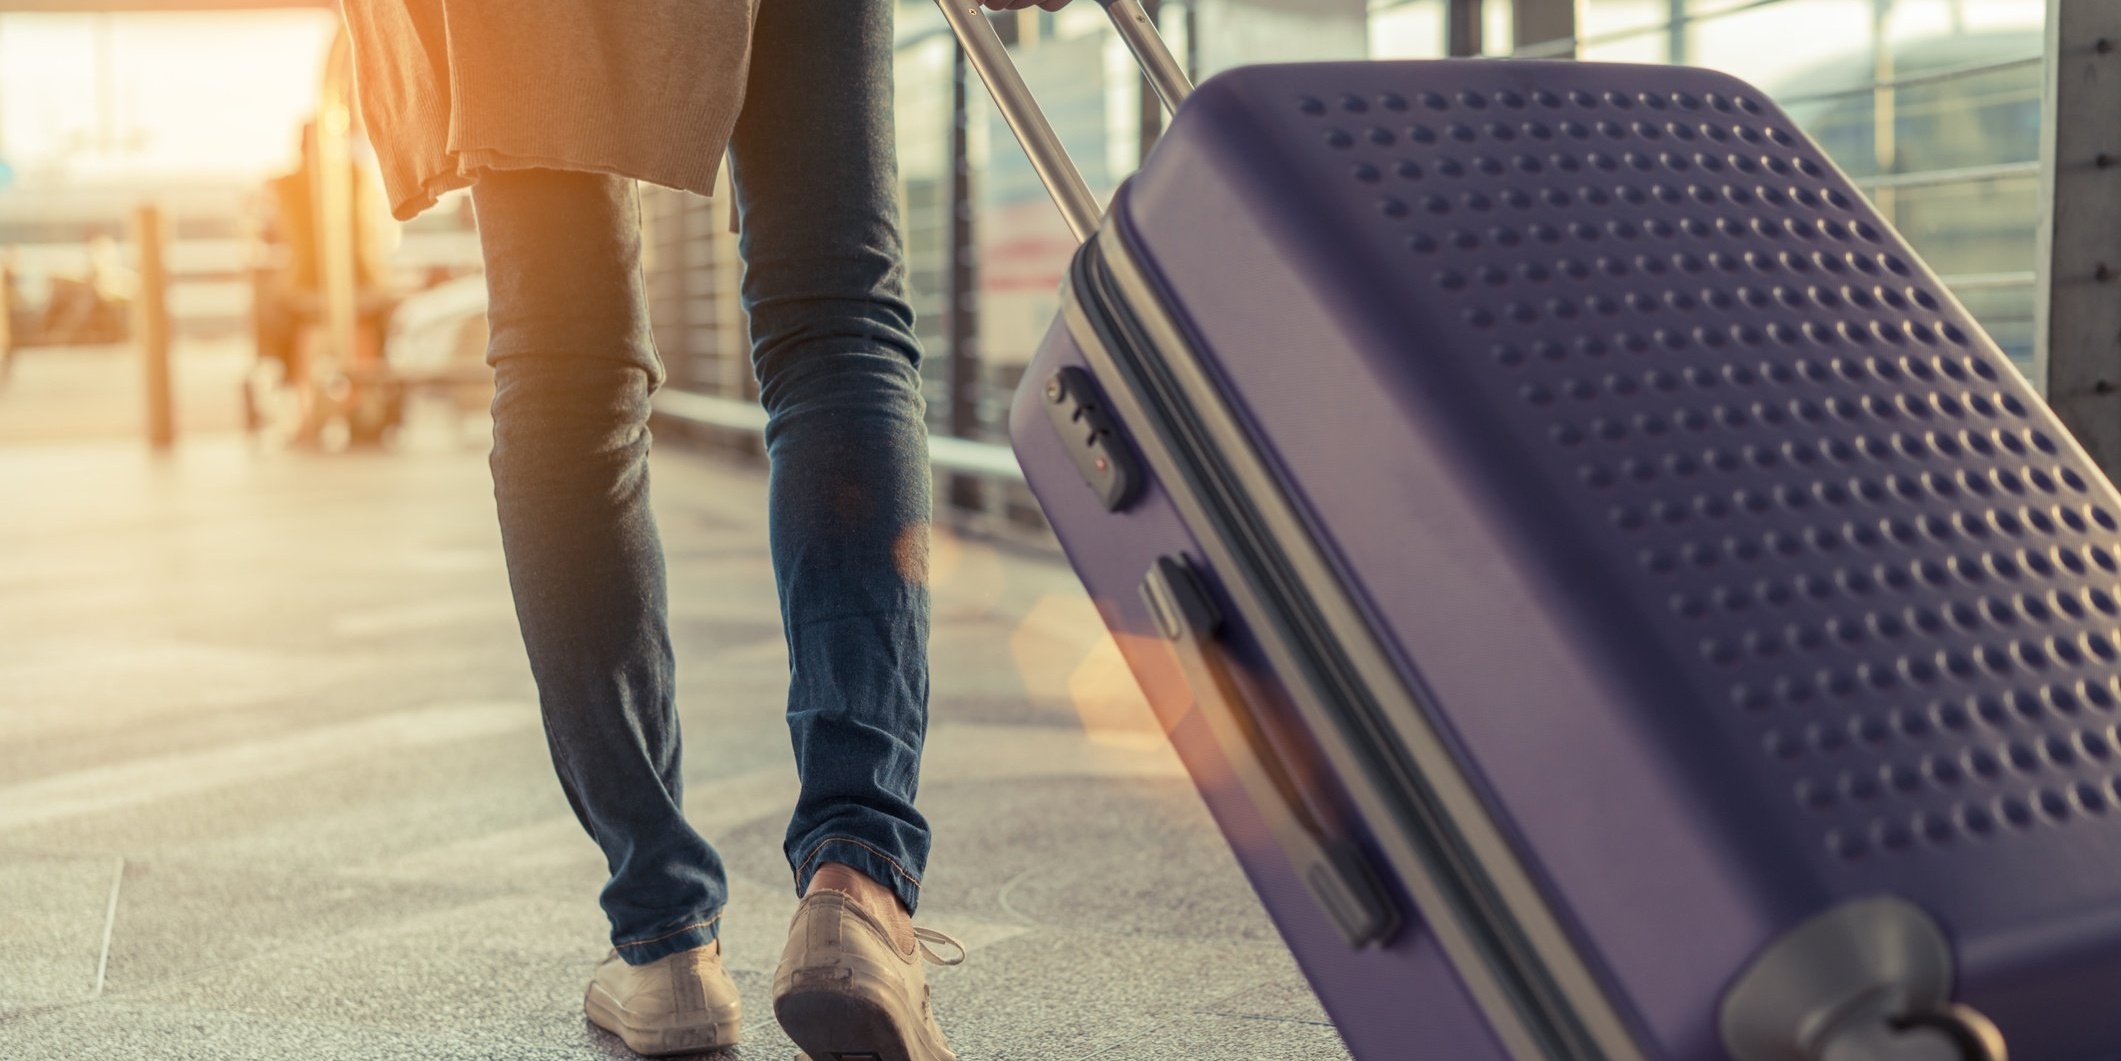 woman traveling in airport with suitcase